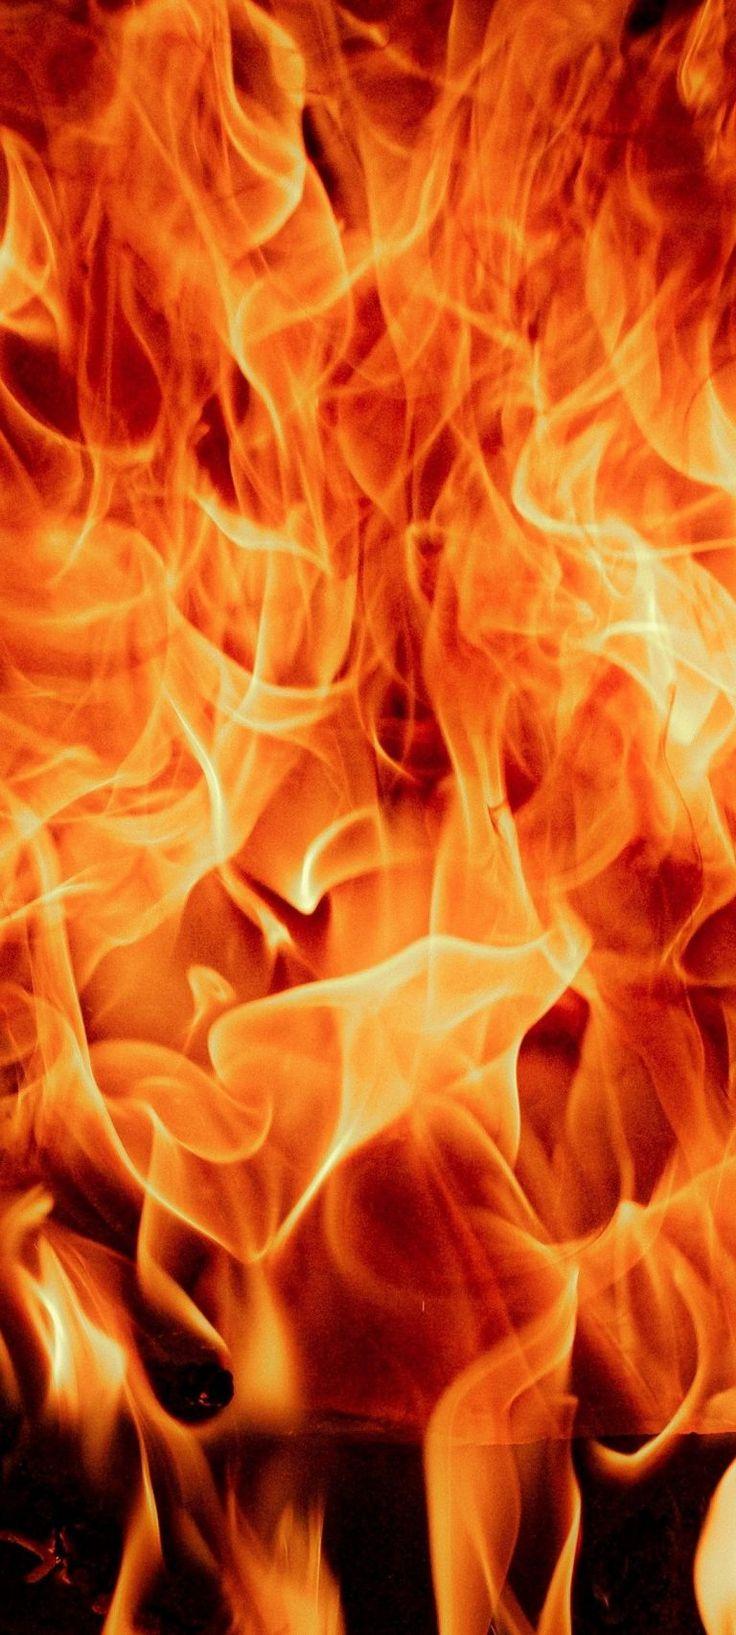 Free Photo  Abstract fire iphone wallpaper, realistic burning flame image